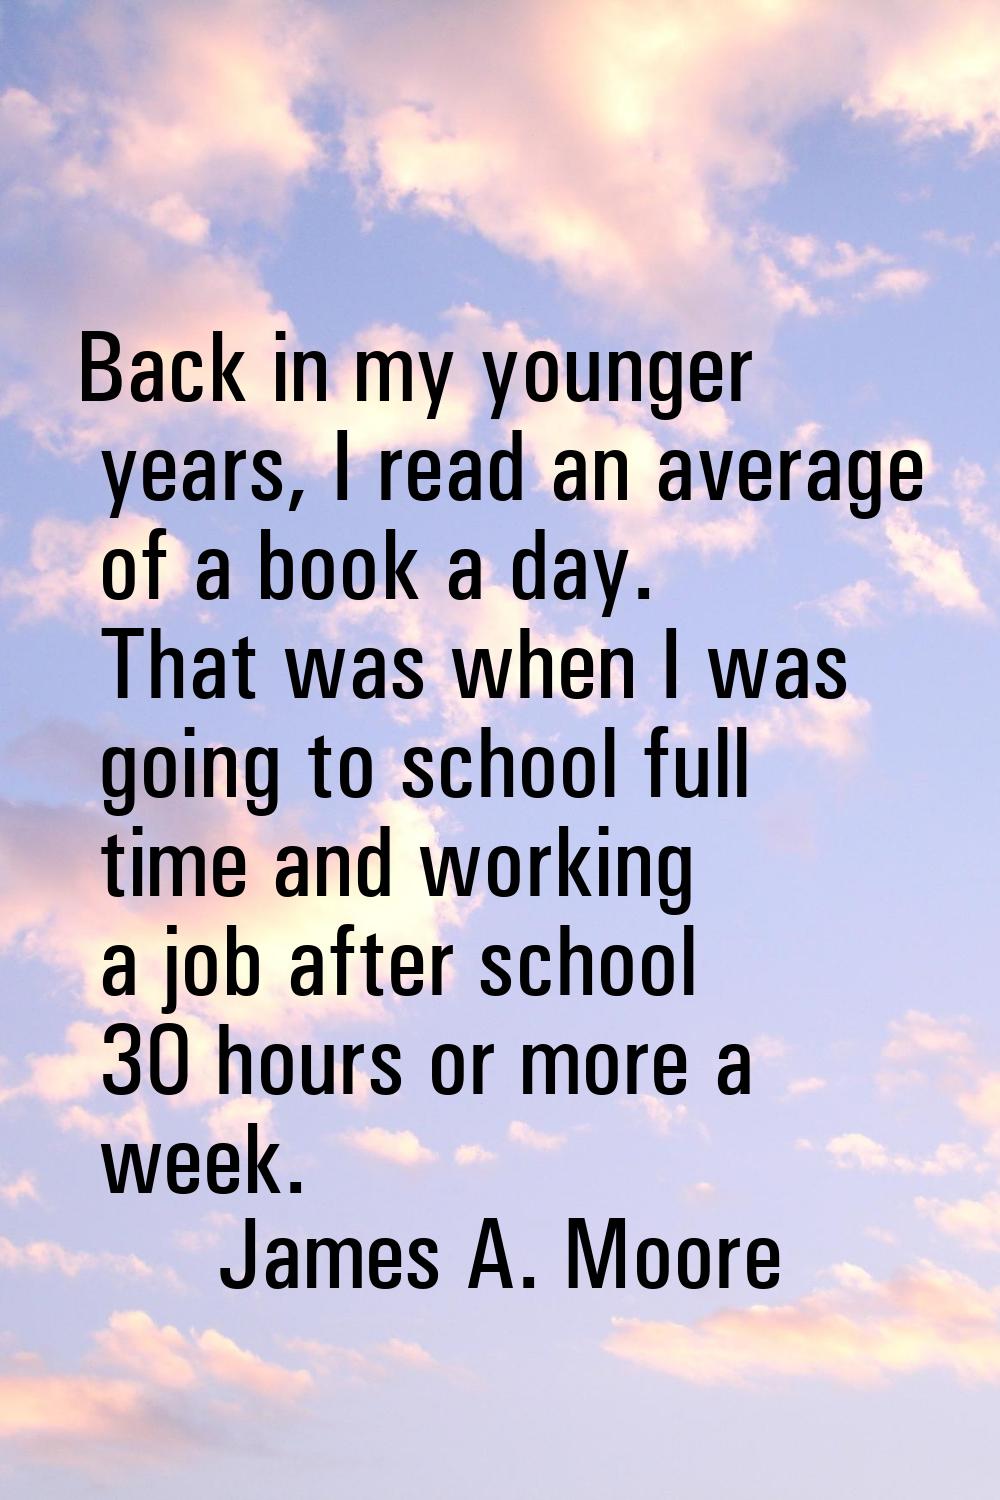 Back in my younger years, I read an average of a book a day. That was when I was going to school fu